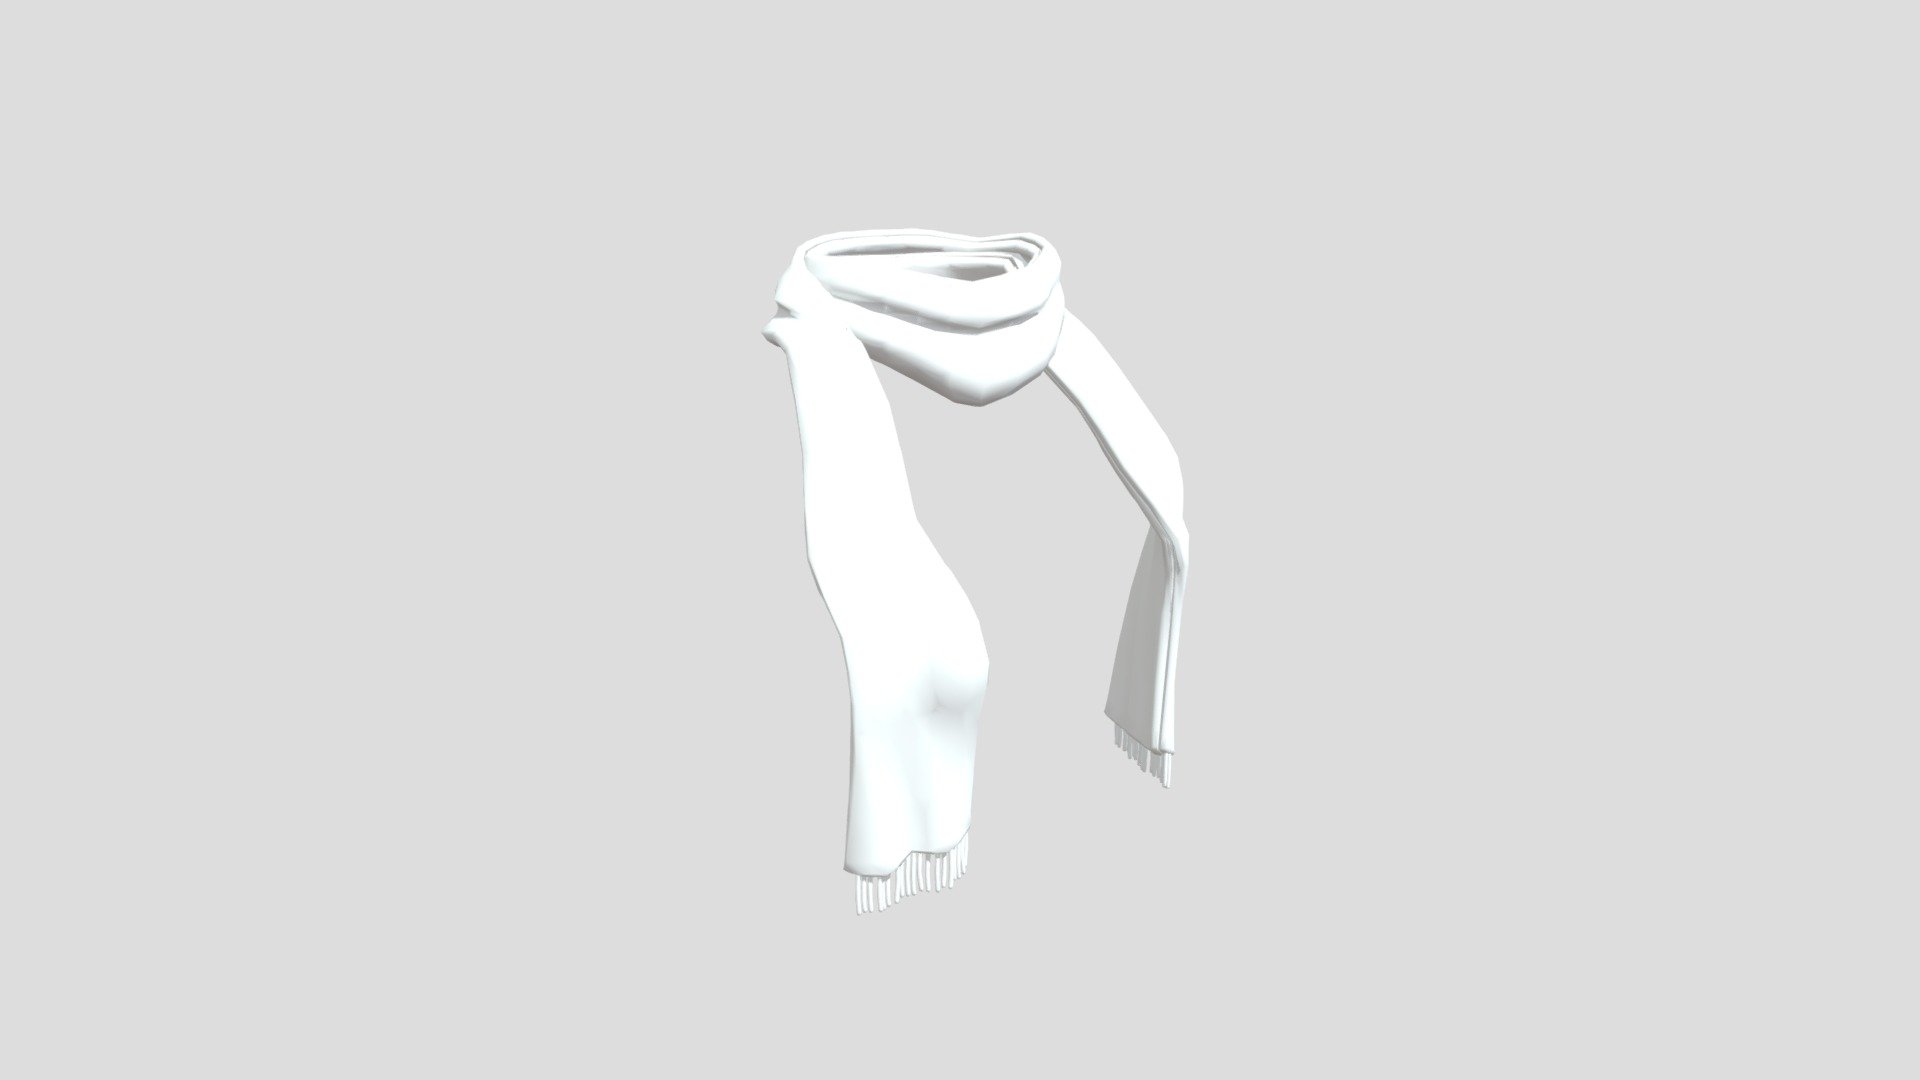 Scarf 3d model. 3ds max 2021 , FBX and OBJ files

Clean topology Non-Overlap UVs

Textures include

Base Color Normal Roughness 2048x2048 PNG texture

568 poly 570 vert In subdivision Level 0 - Scarf - 3D model by Jay0123 3d model